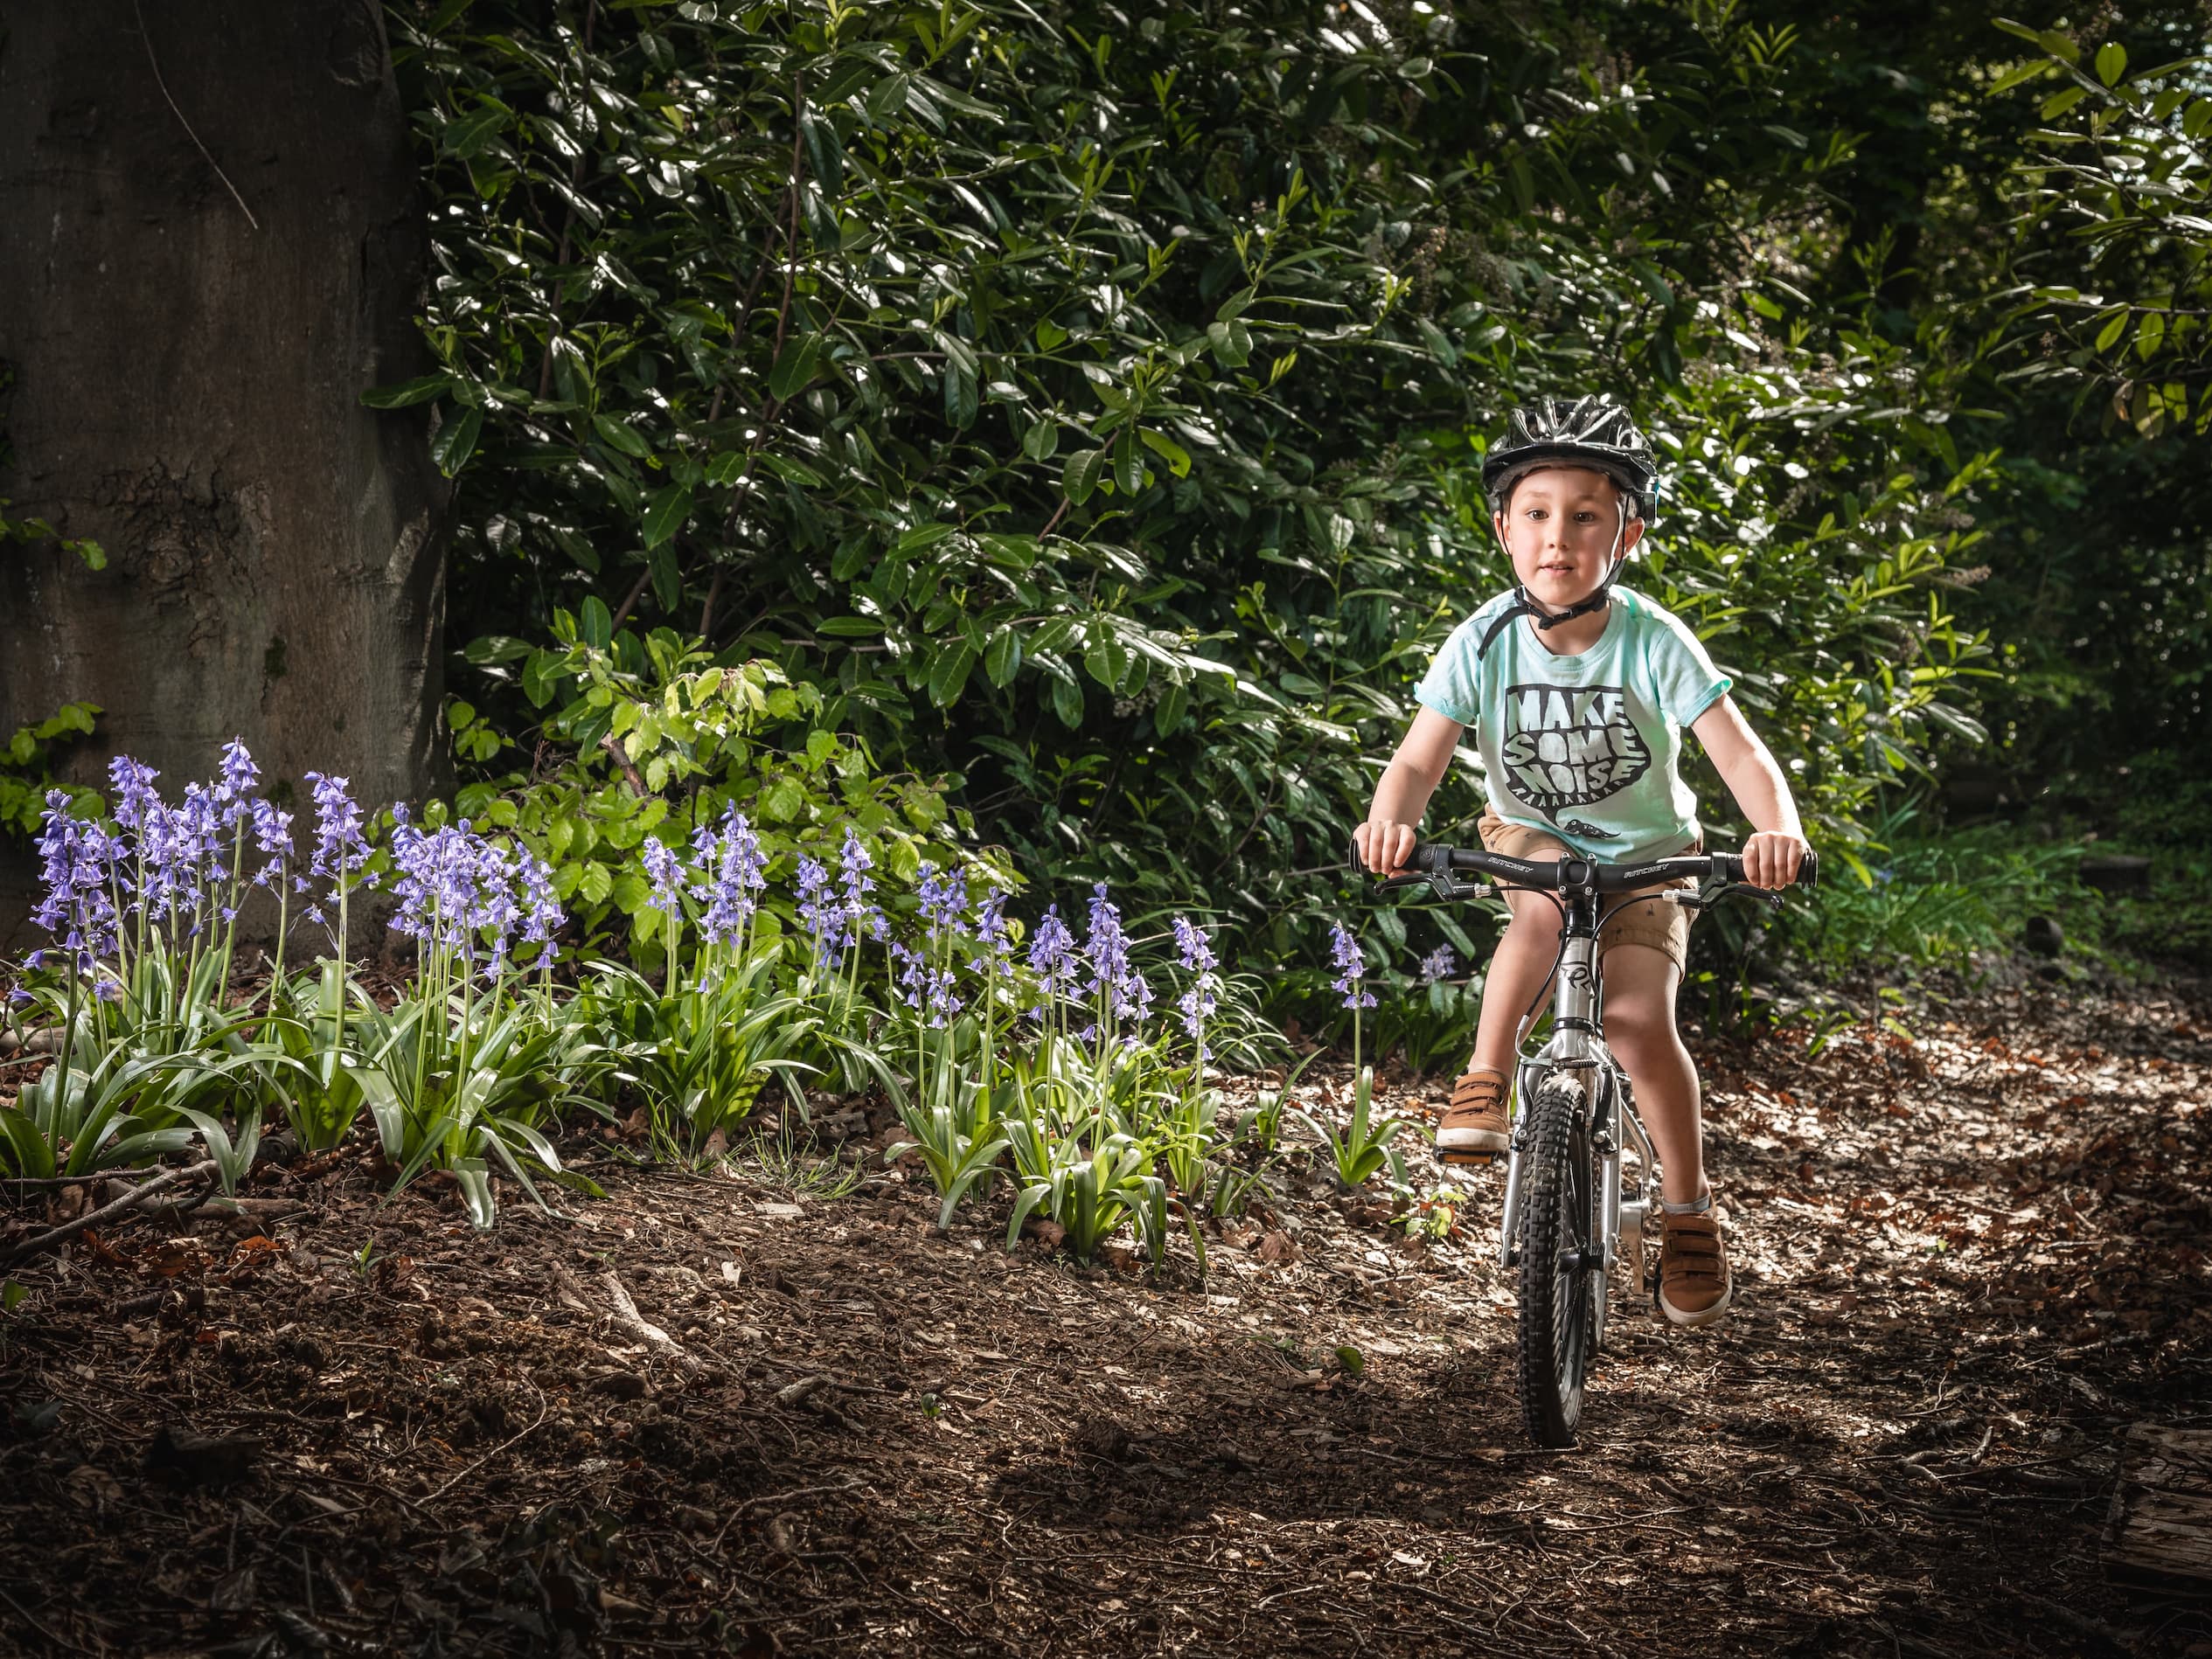 Child cycling past some bluebells near a tree trunk